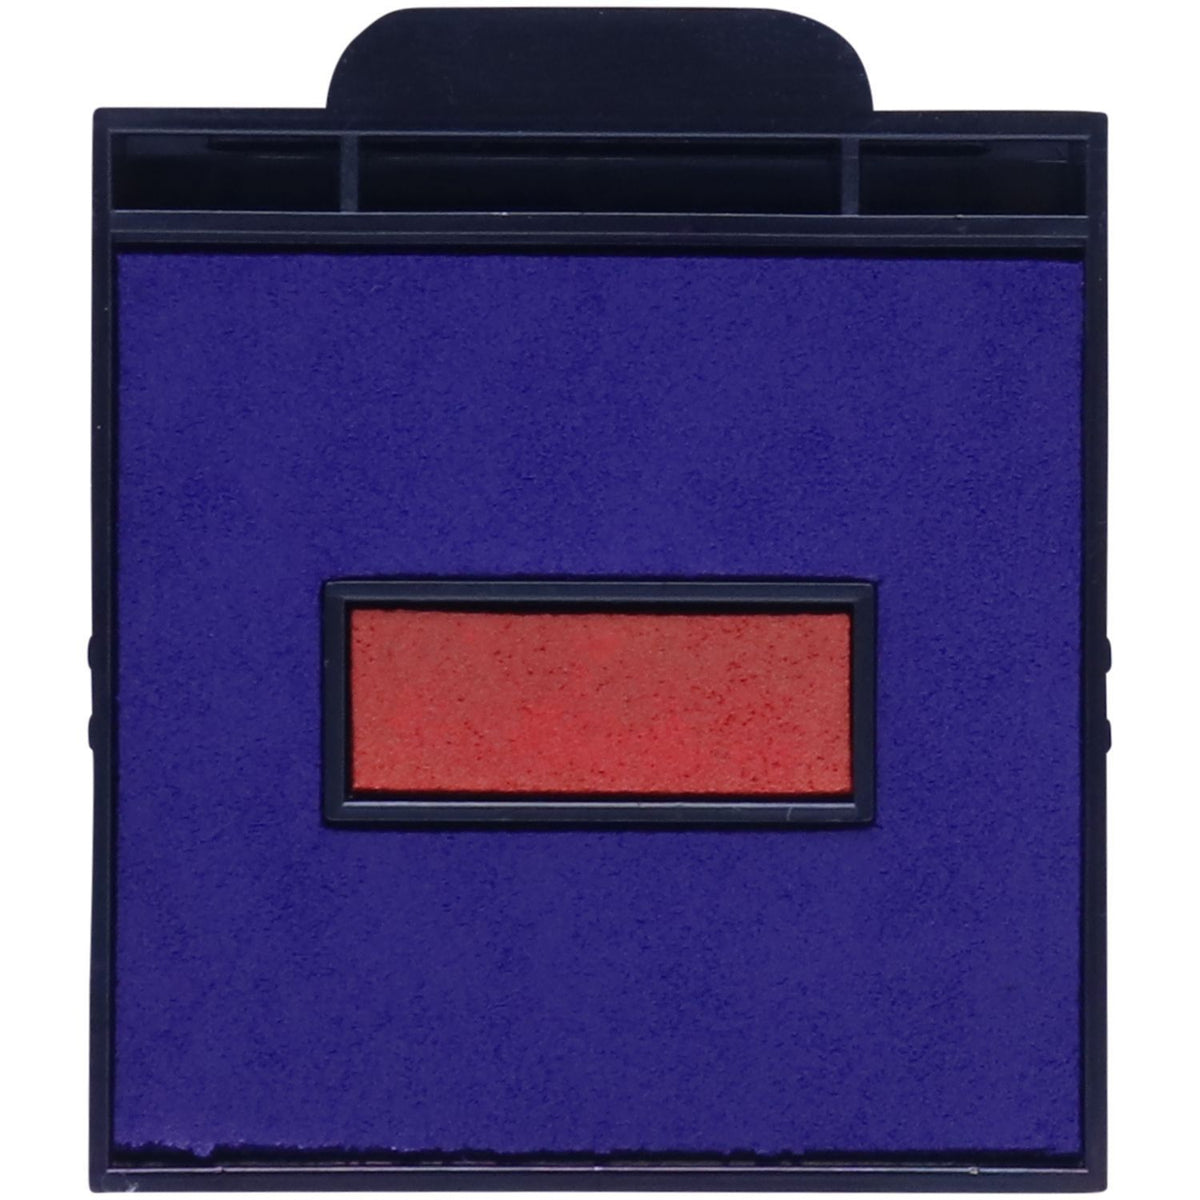 Two Color Replacement Ink Pad For Hm 6100 Blue Red